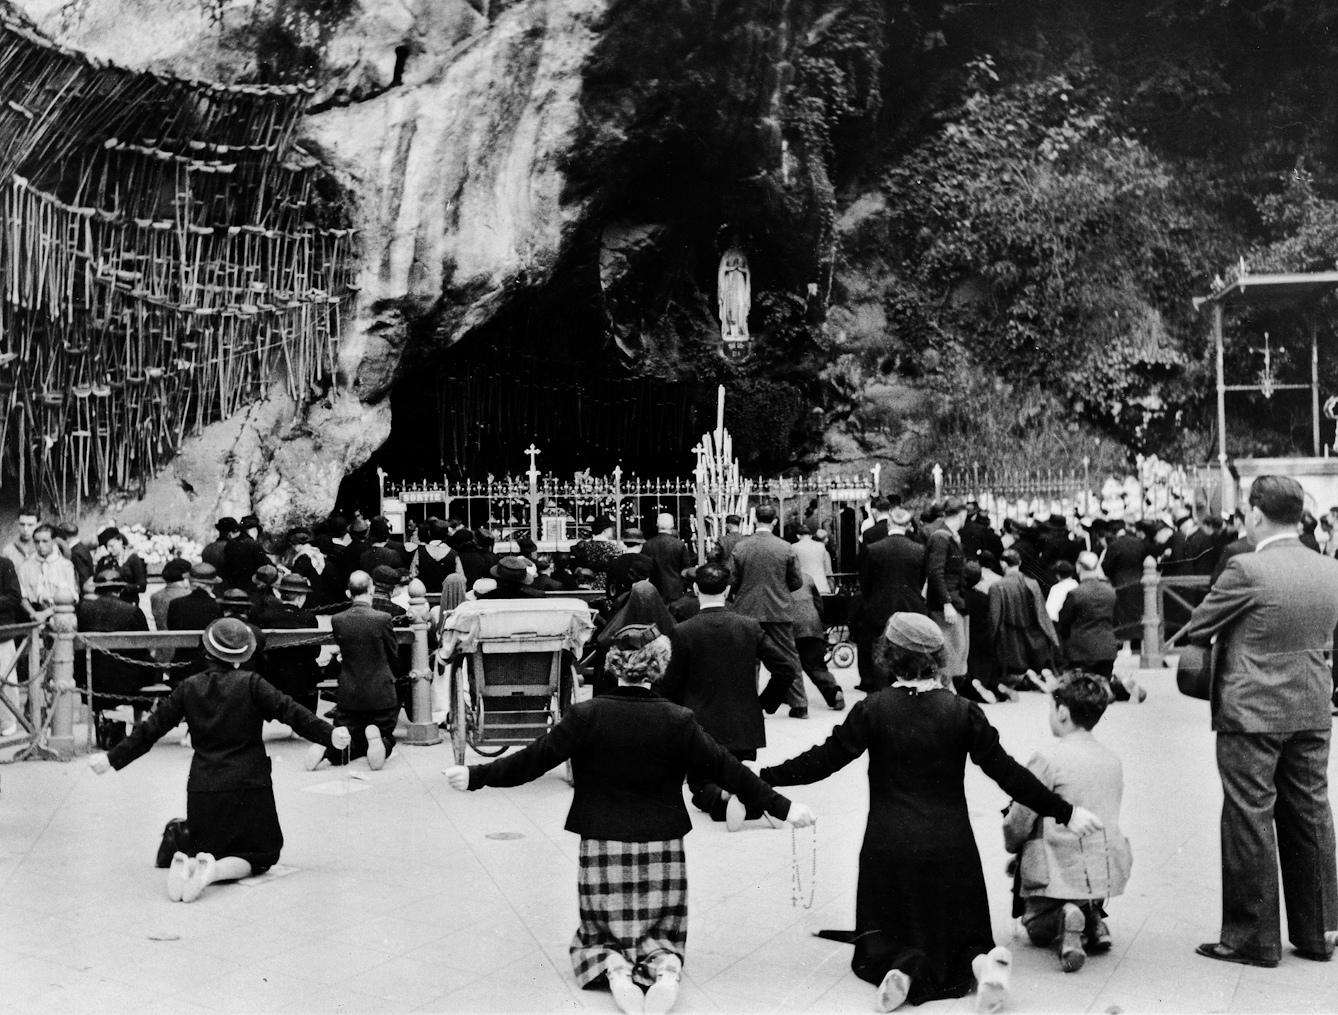 Black and white photograph of people kneeling at a shrine in Lourdes. Beside the worshippers, crutches can be seen hanging up.